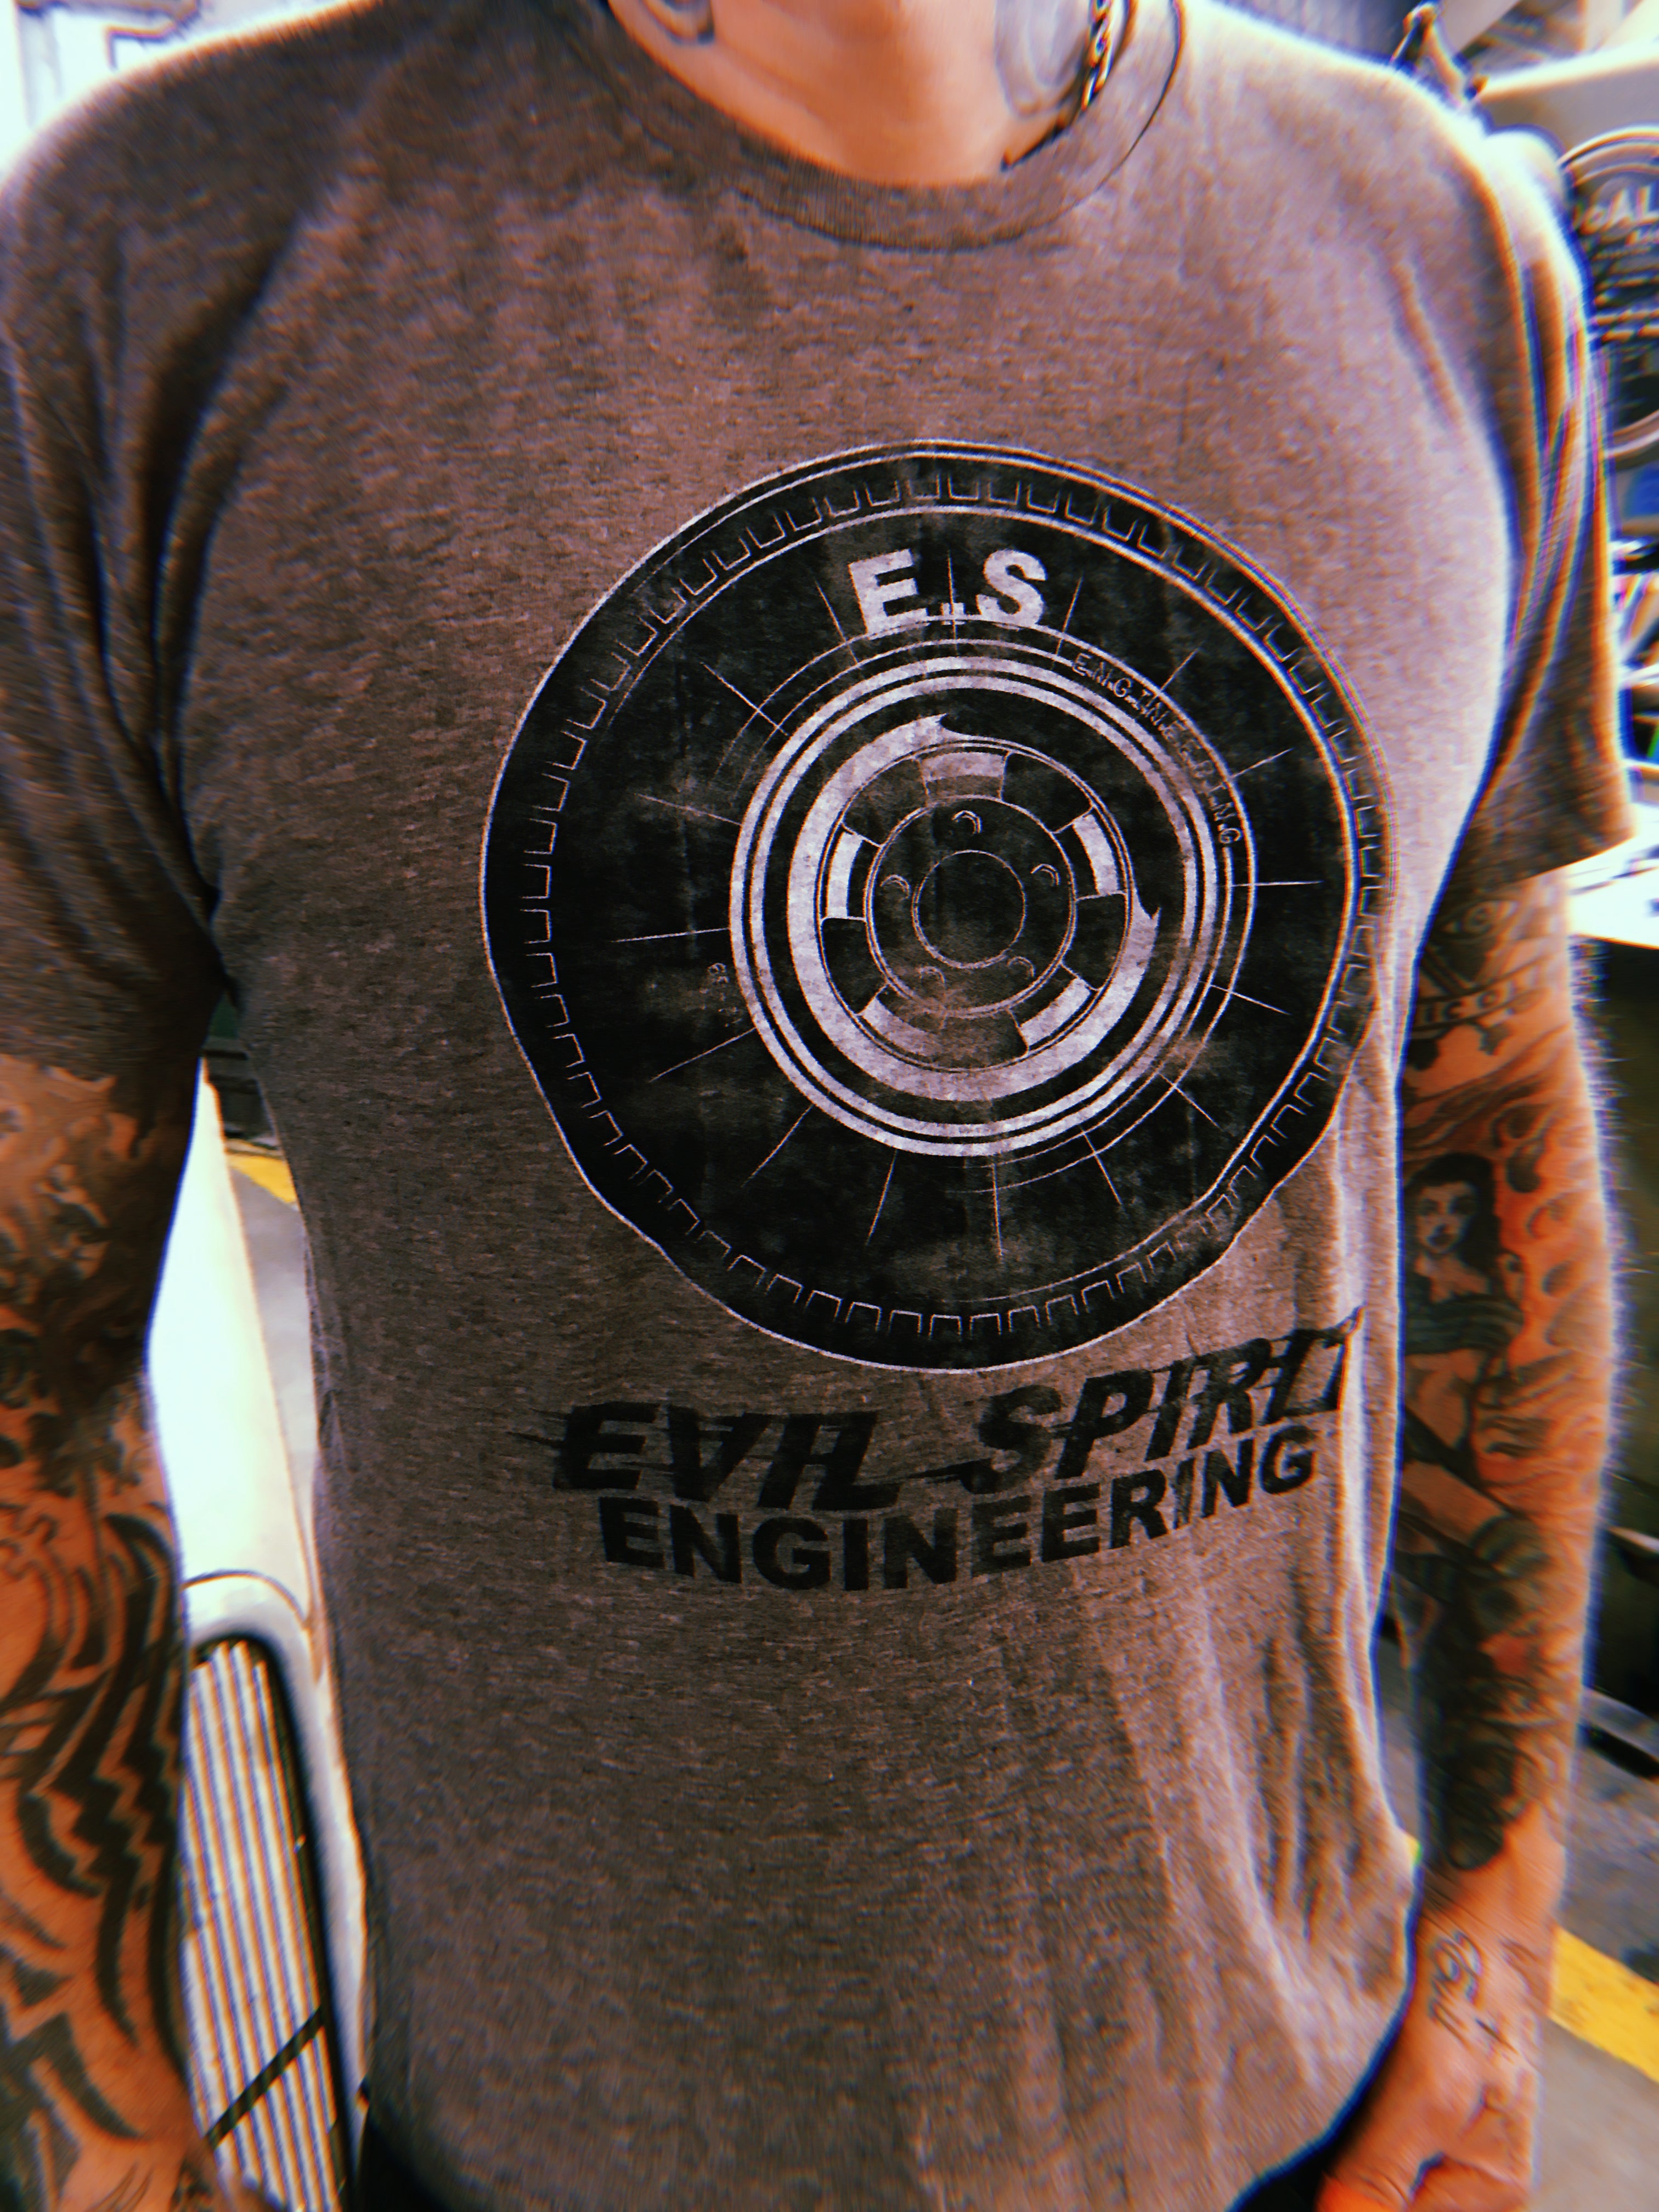 Brown heather shirt with halibrand wheel logo on top, with E.S. letters in white on the tire, and "Evil Spirit Engineering" text below in black.